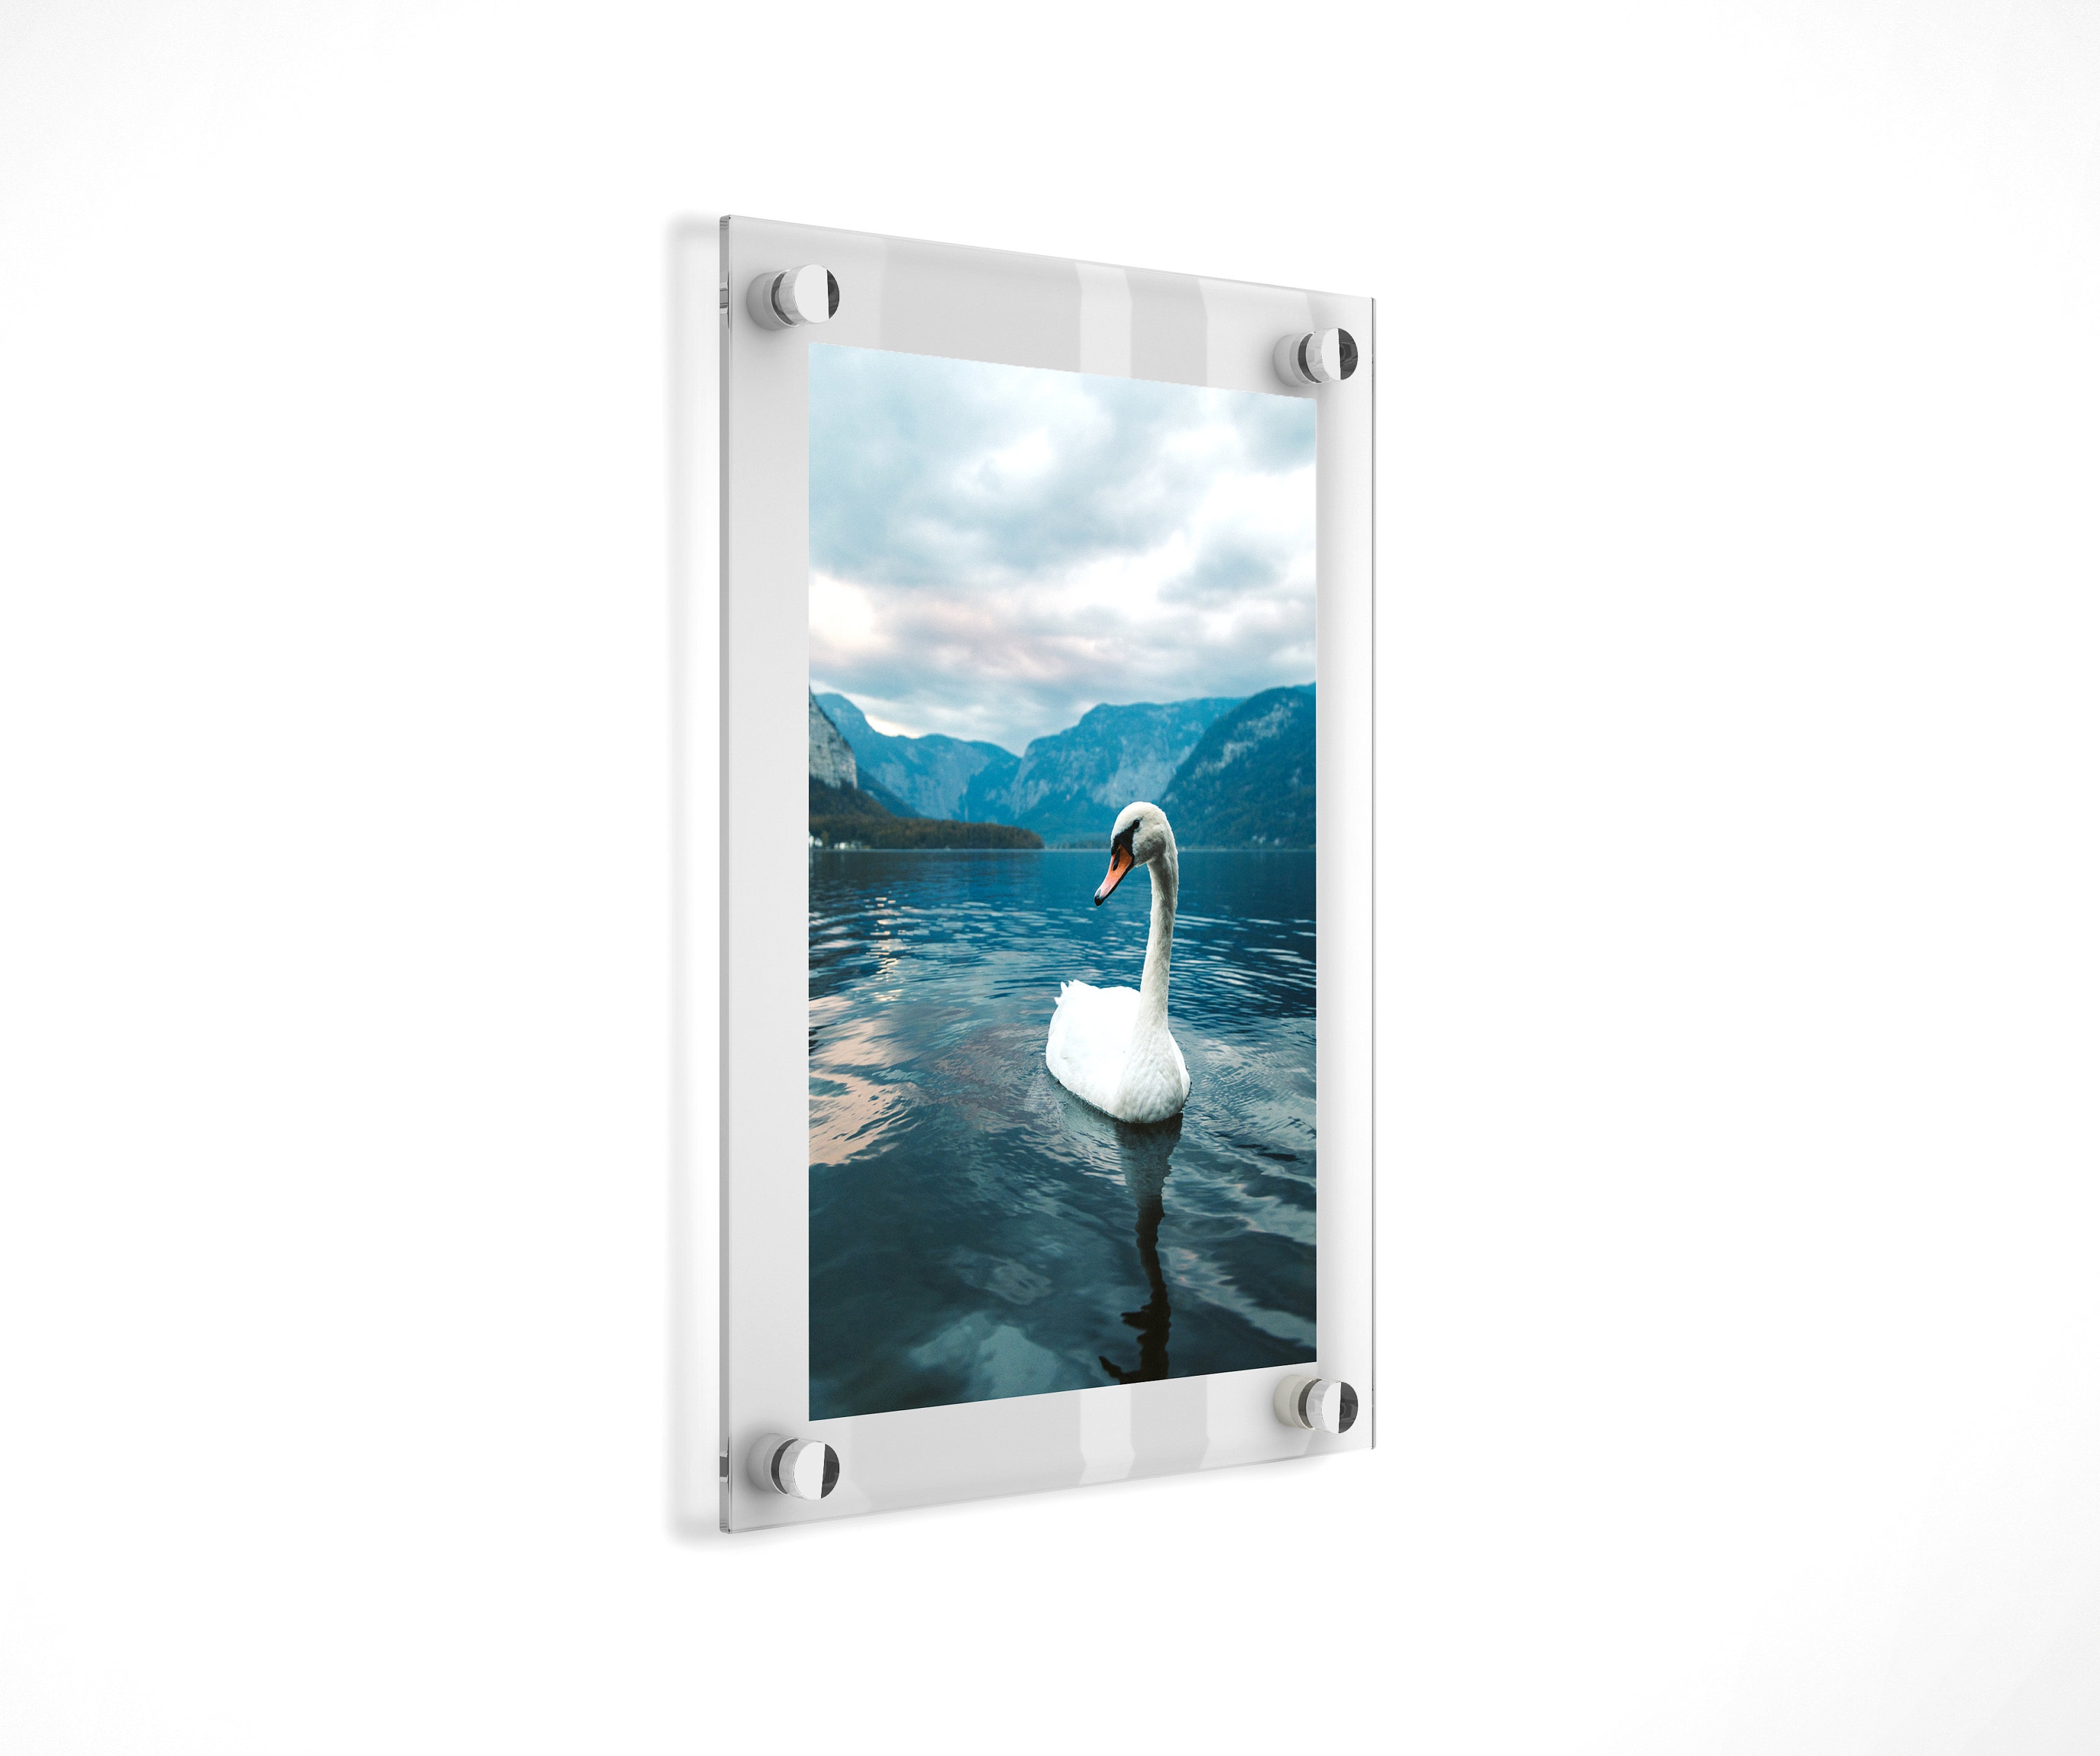 3 Pack (20 x 30) Clear Acrylic Wall Mount Floating Frameless Picture  Frame Double Panel Plexiglass Display with Metal Standoff for Photos  Artwork